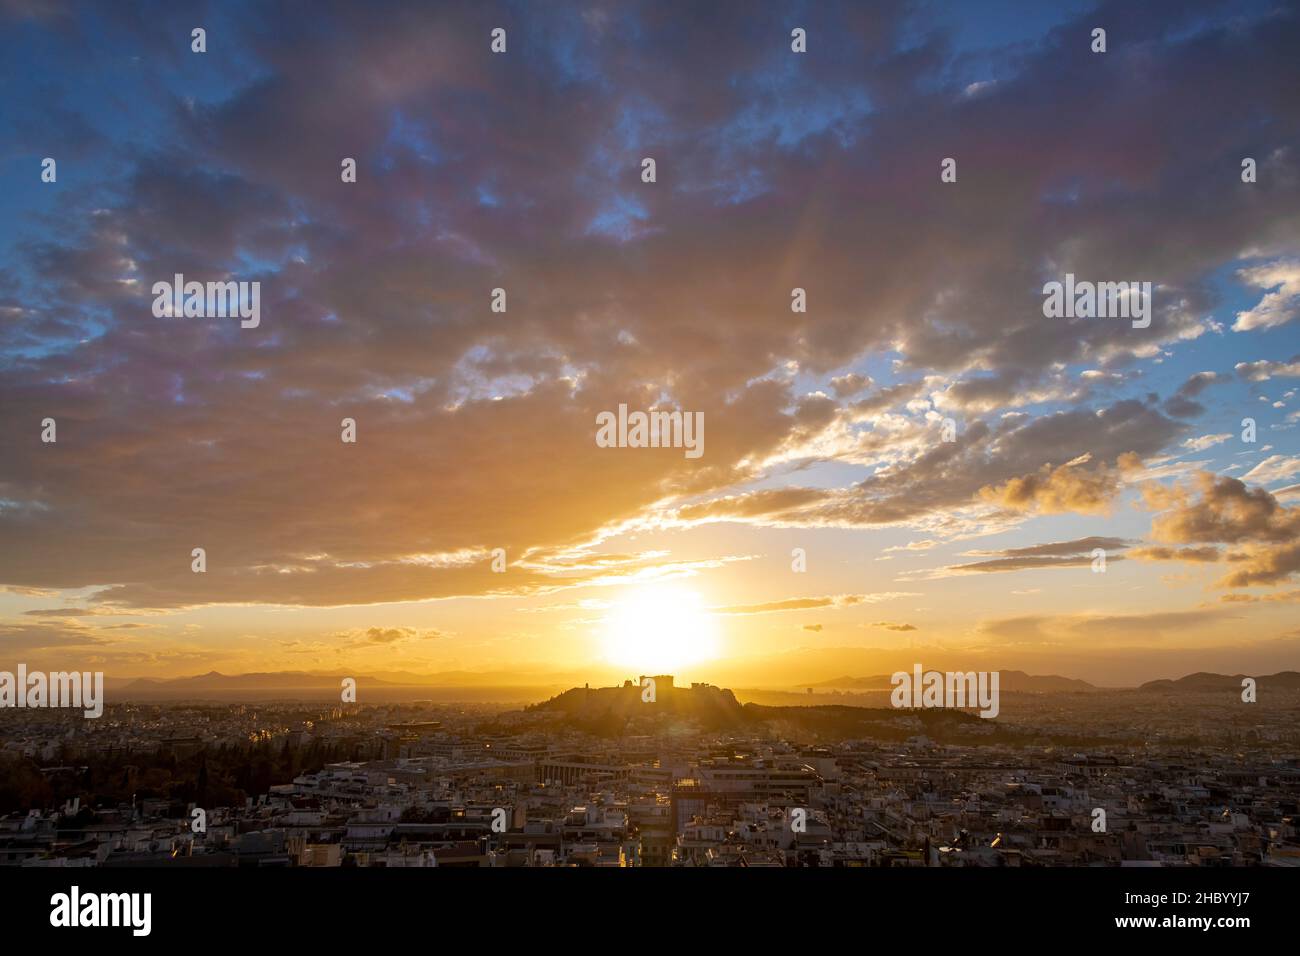 Horizontal aerial view of the Acropolis and the city of Athens at sunset, Greece. Stock Photo